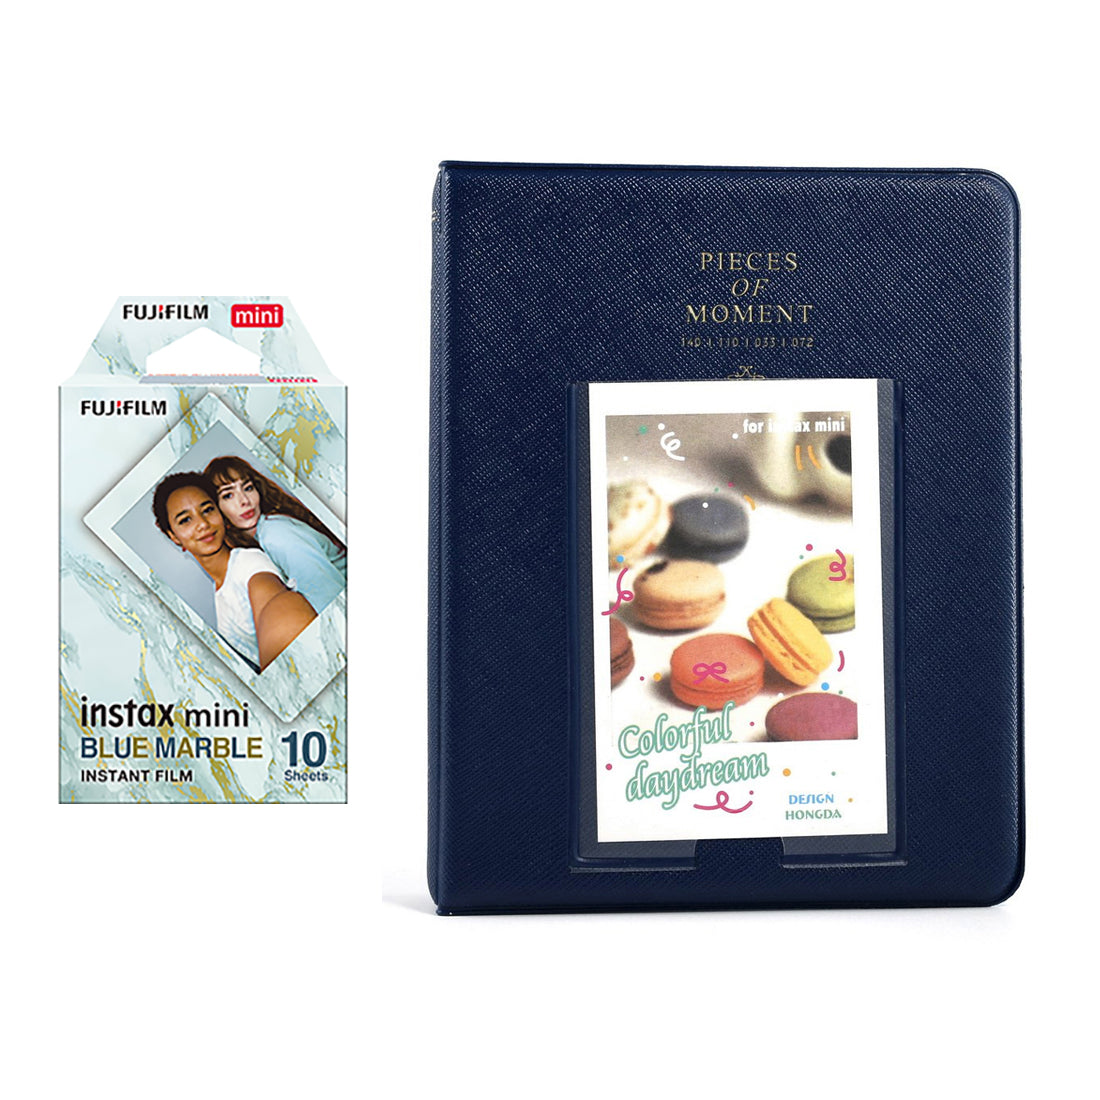 Fujifilm Instax Mini 10X1 blue marble Instant Film with Instax Time Photo Album 64 Sheets (Navy blue)